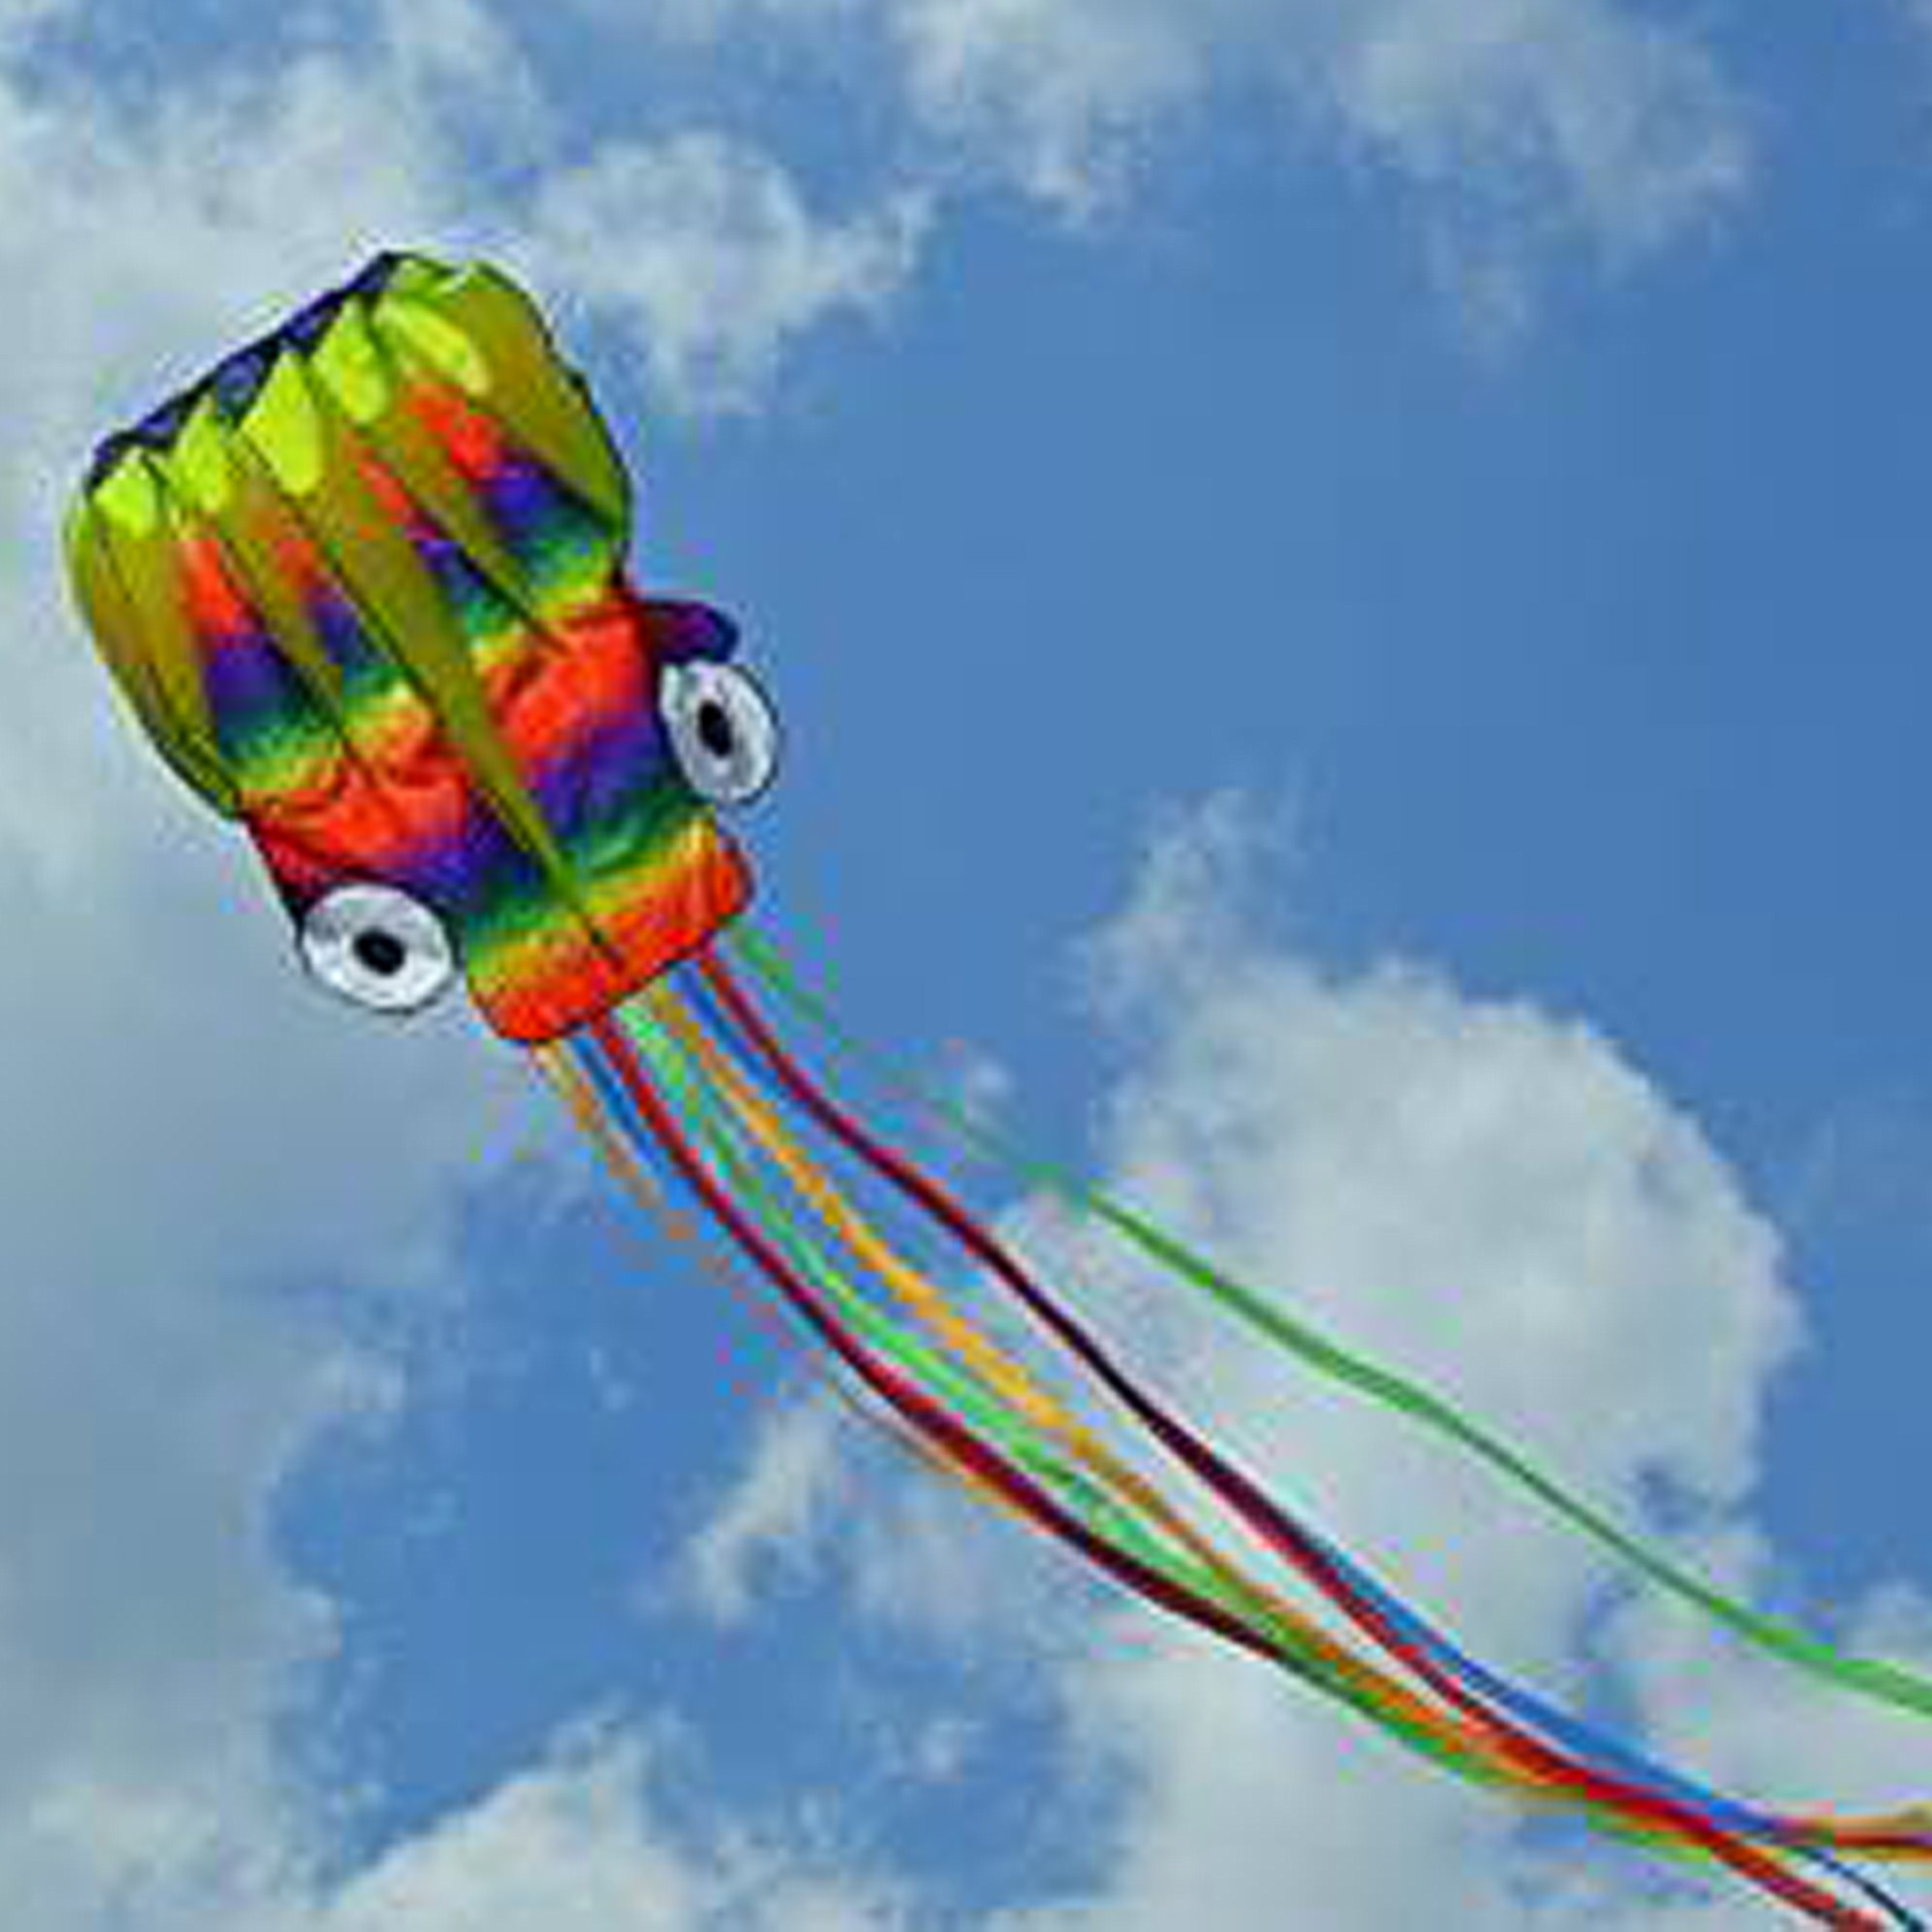 Great for Summer Funy Loutytuo LOUTY Big Rainbow Octopus Outdoor Kite for Kids and Adults Includes Kite Line and Bag